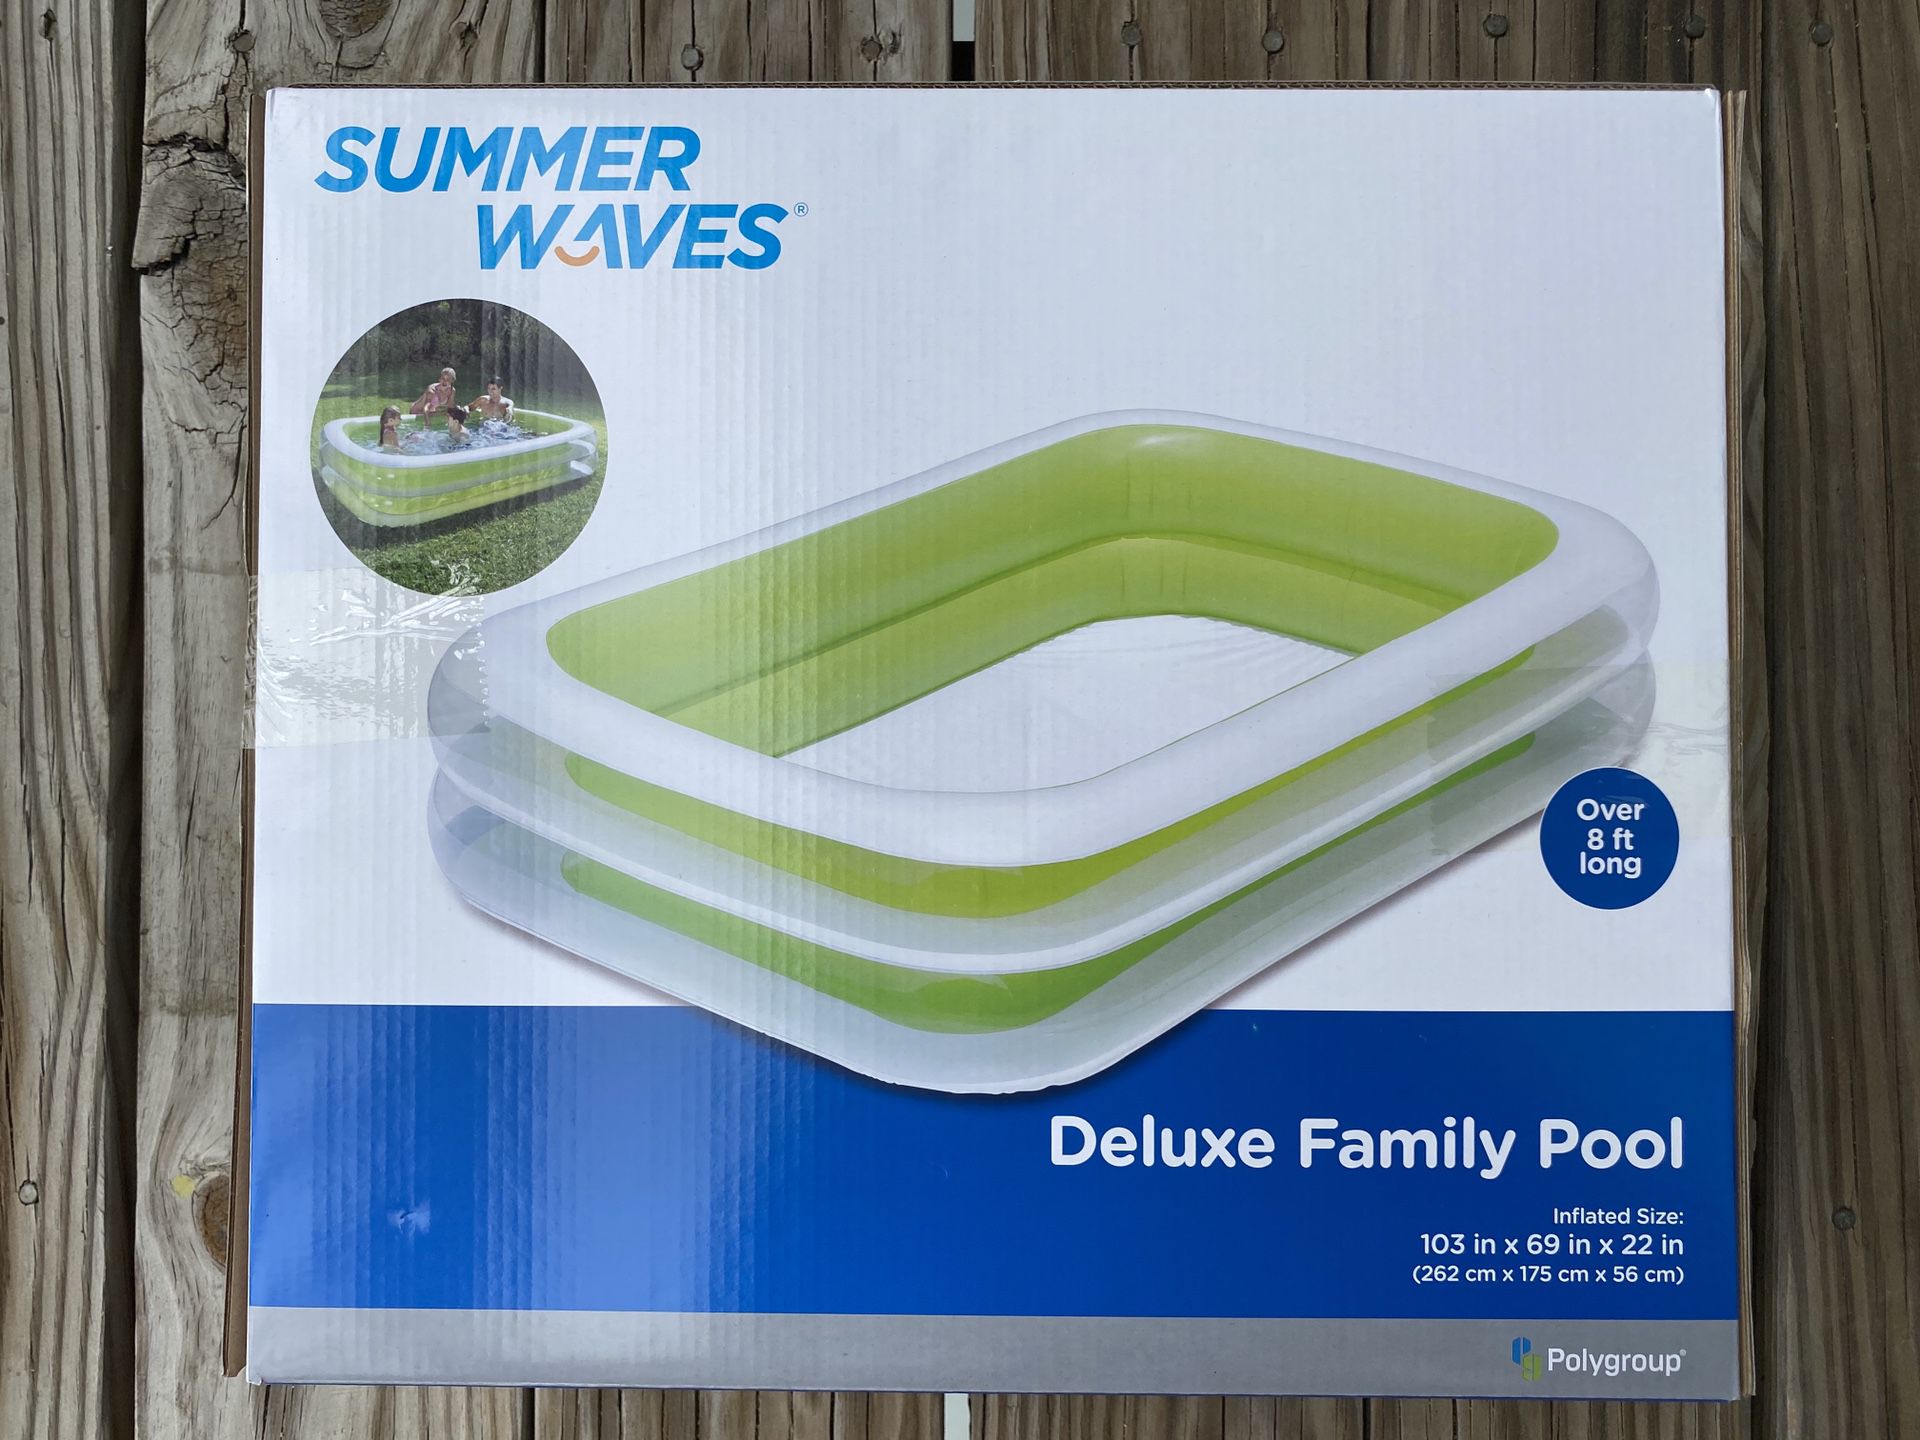 NEW - Summer Waves Deluxe Family Inflatable Pool